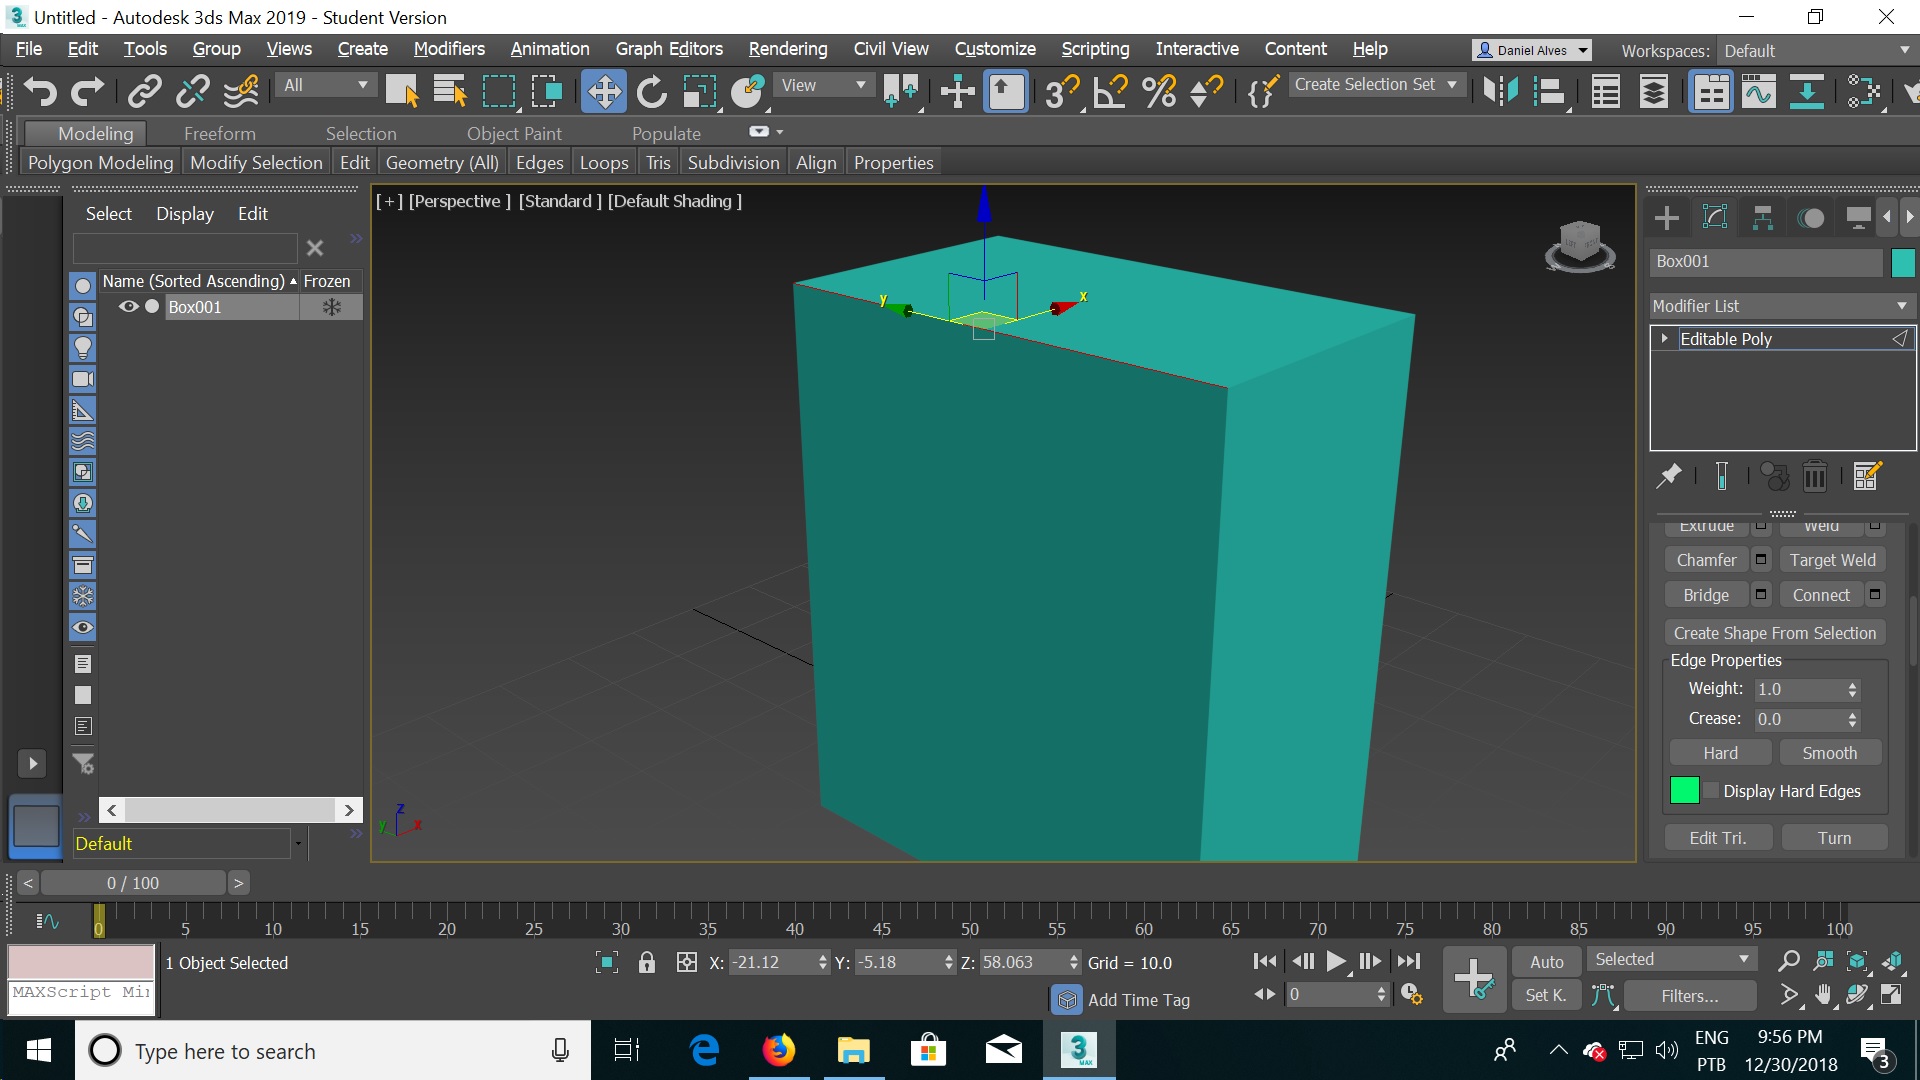 3ds max - 2019: edge selection not red - Autodesk Community - 3ds